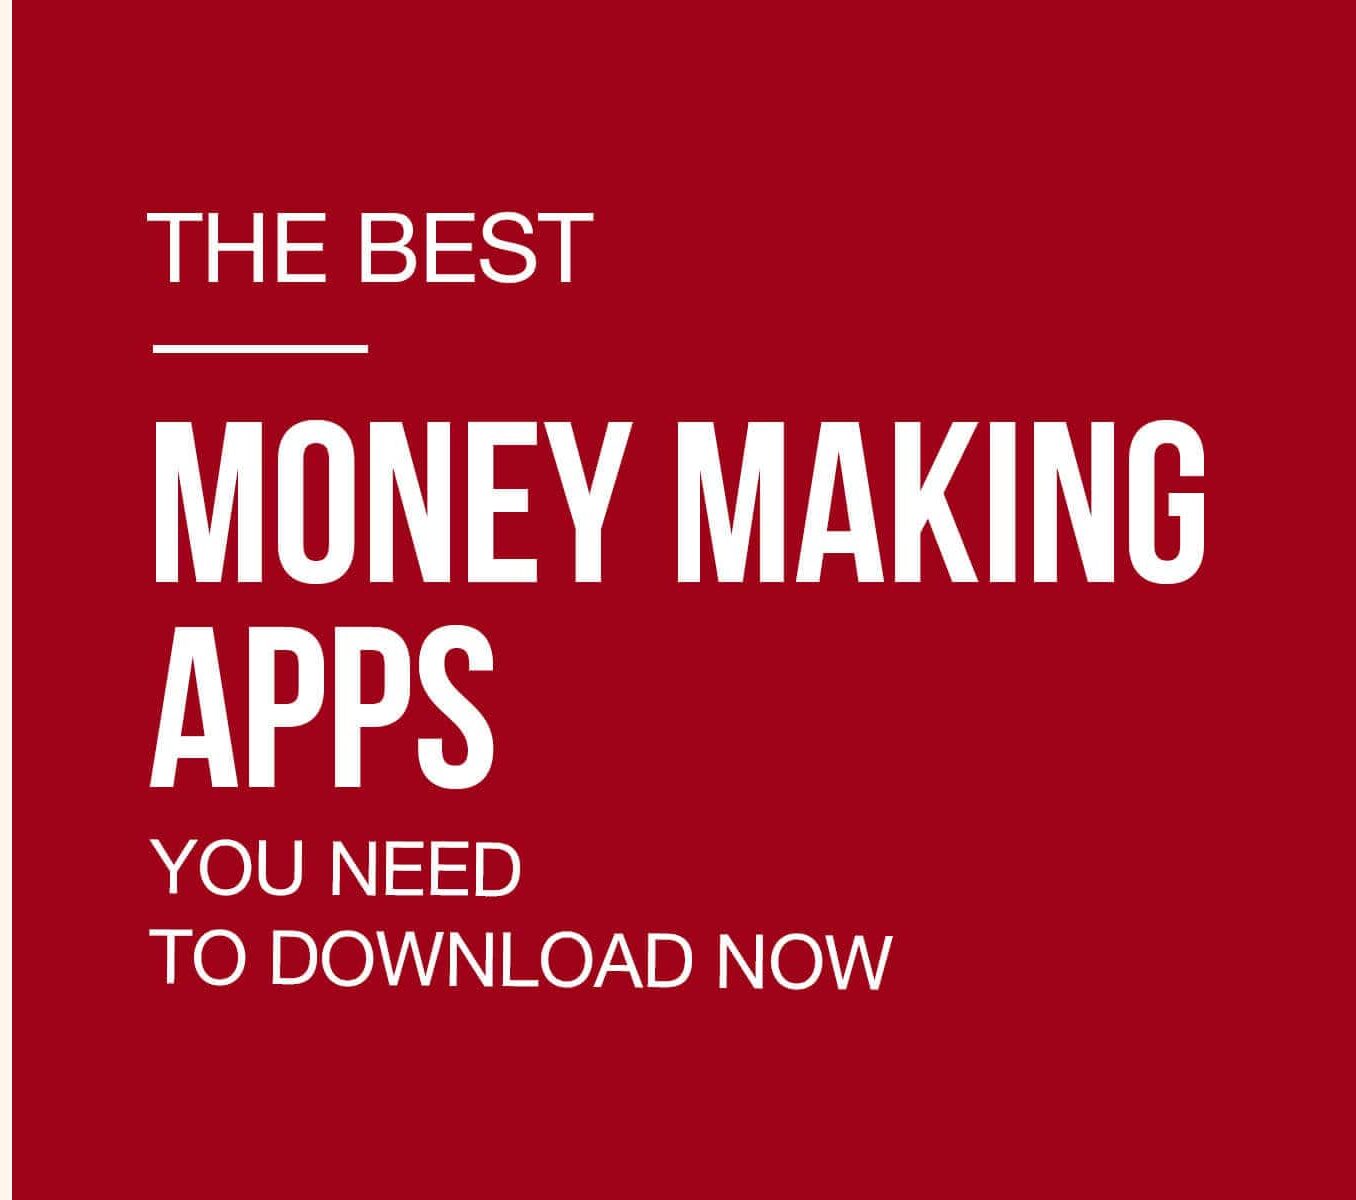 29 Legit Money Making Apps For Android/IOS